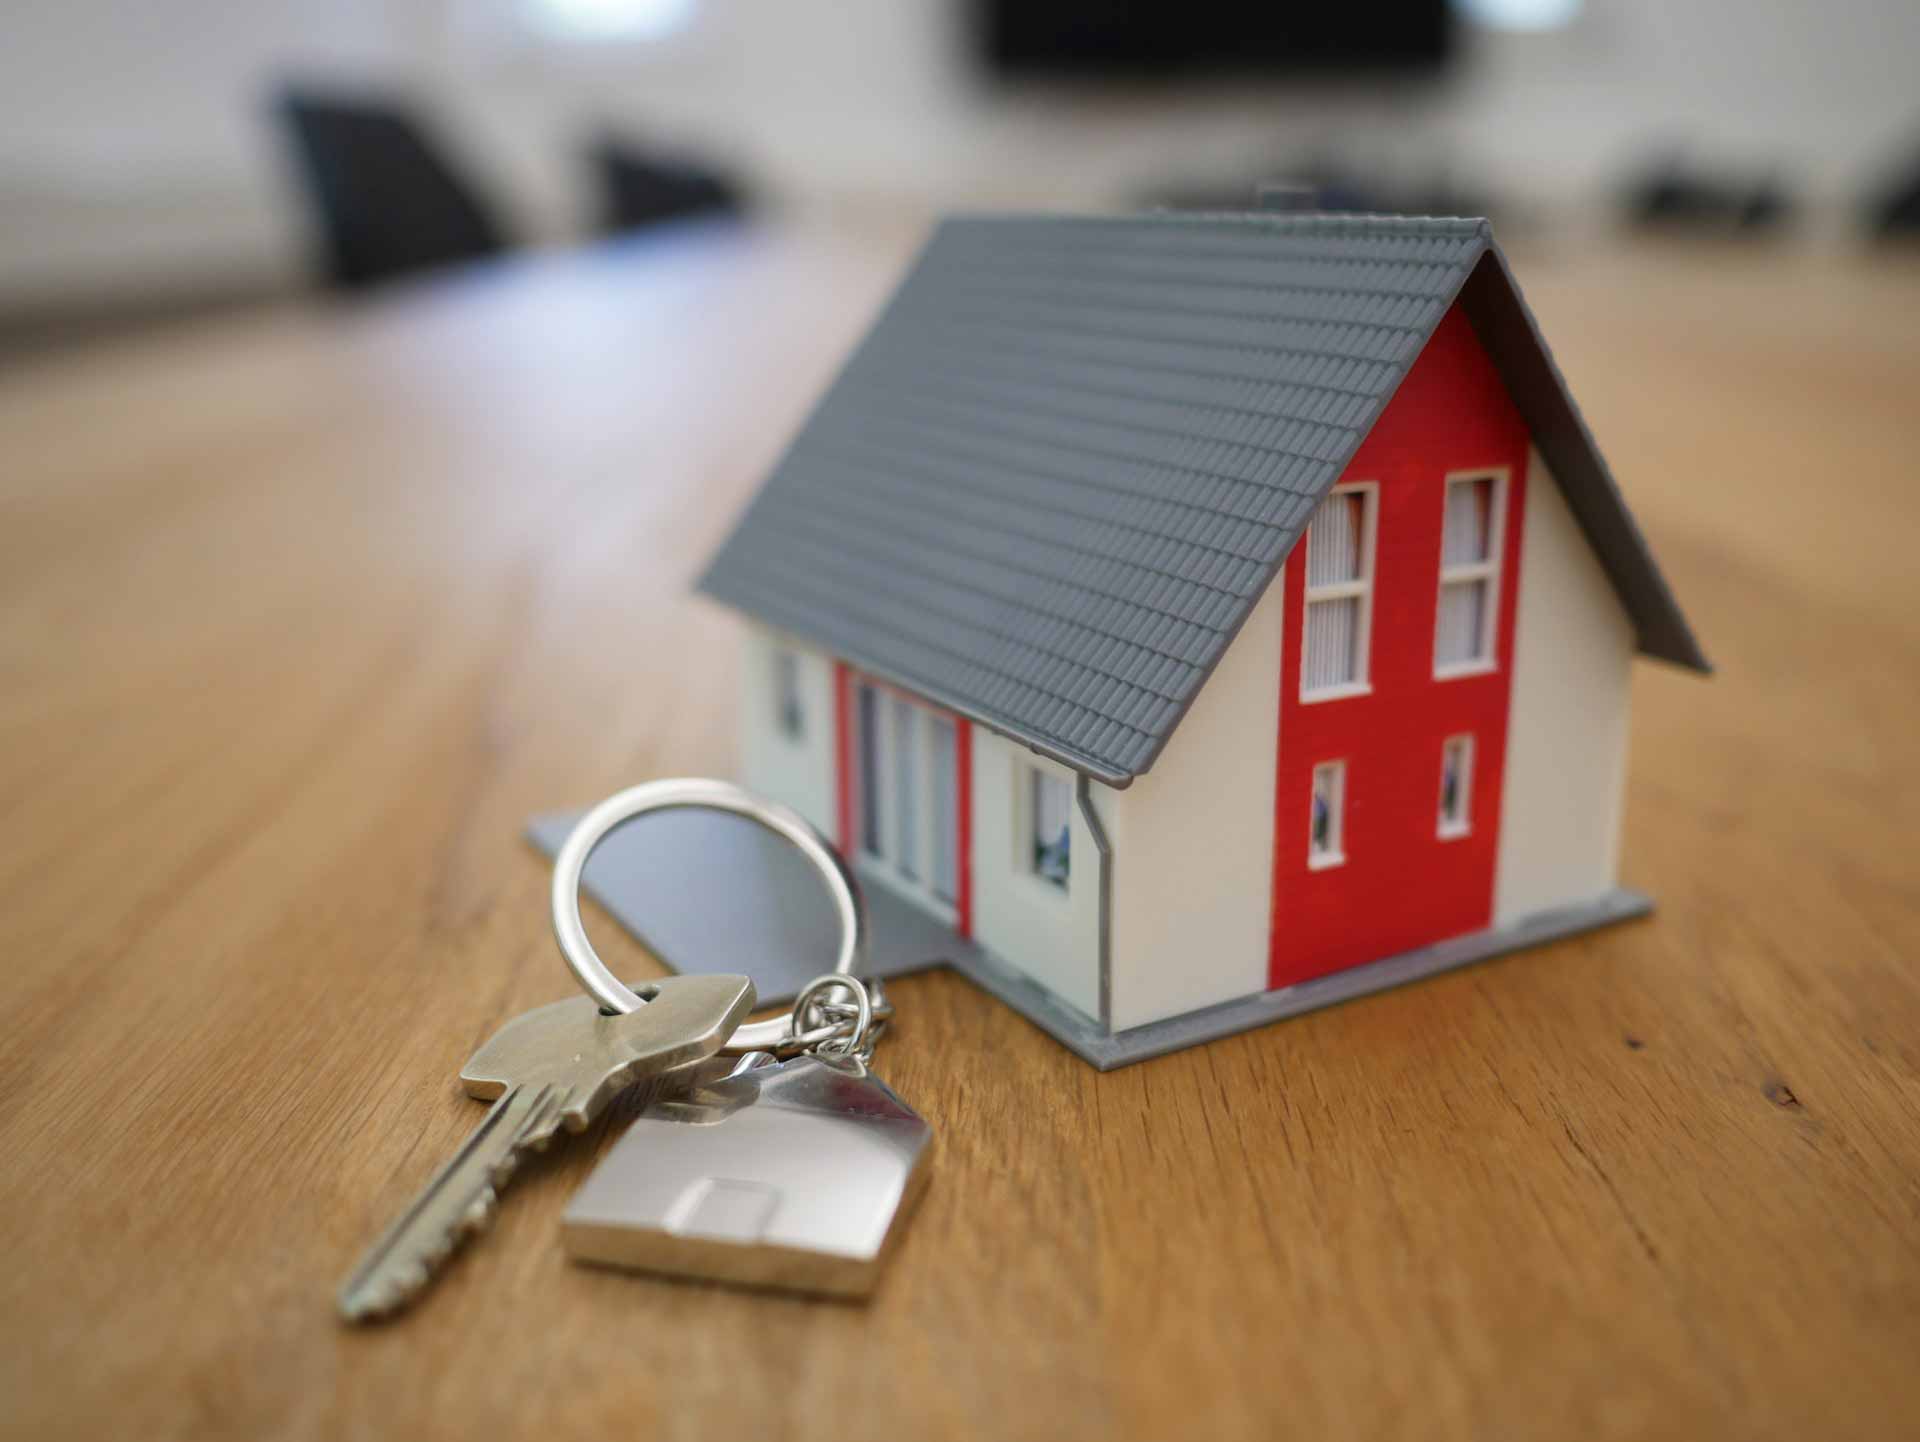 Small toy house sitting on table next to house keys